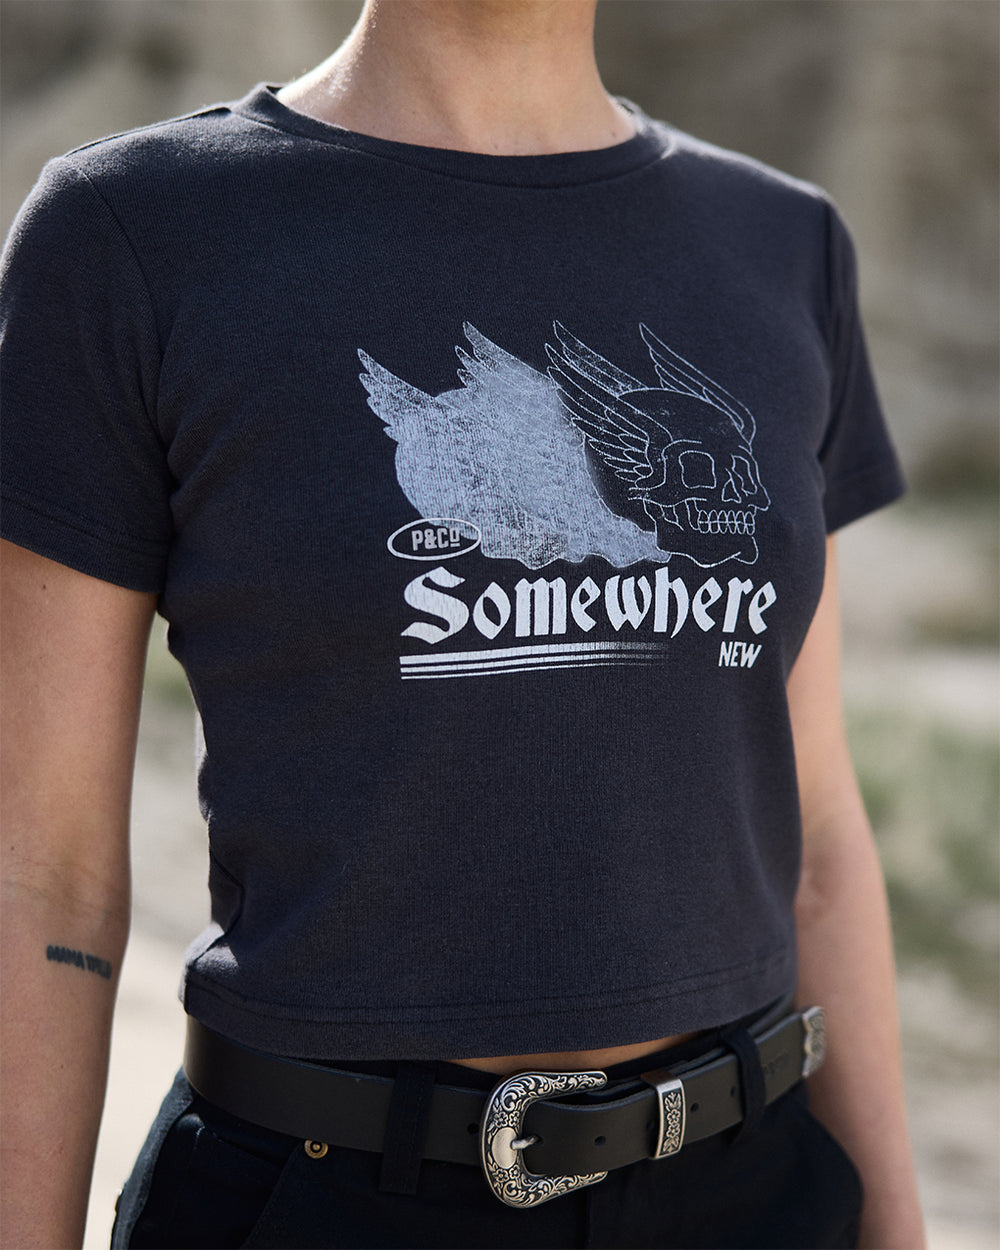 Somewhere New Baby T-Shirt - Heavy Washed Black